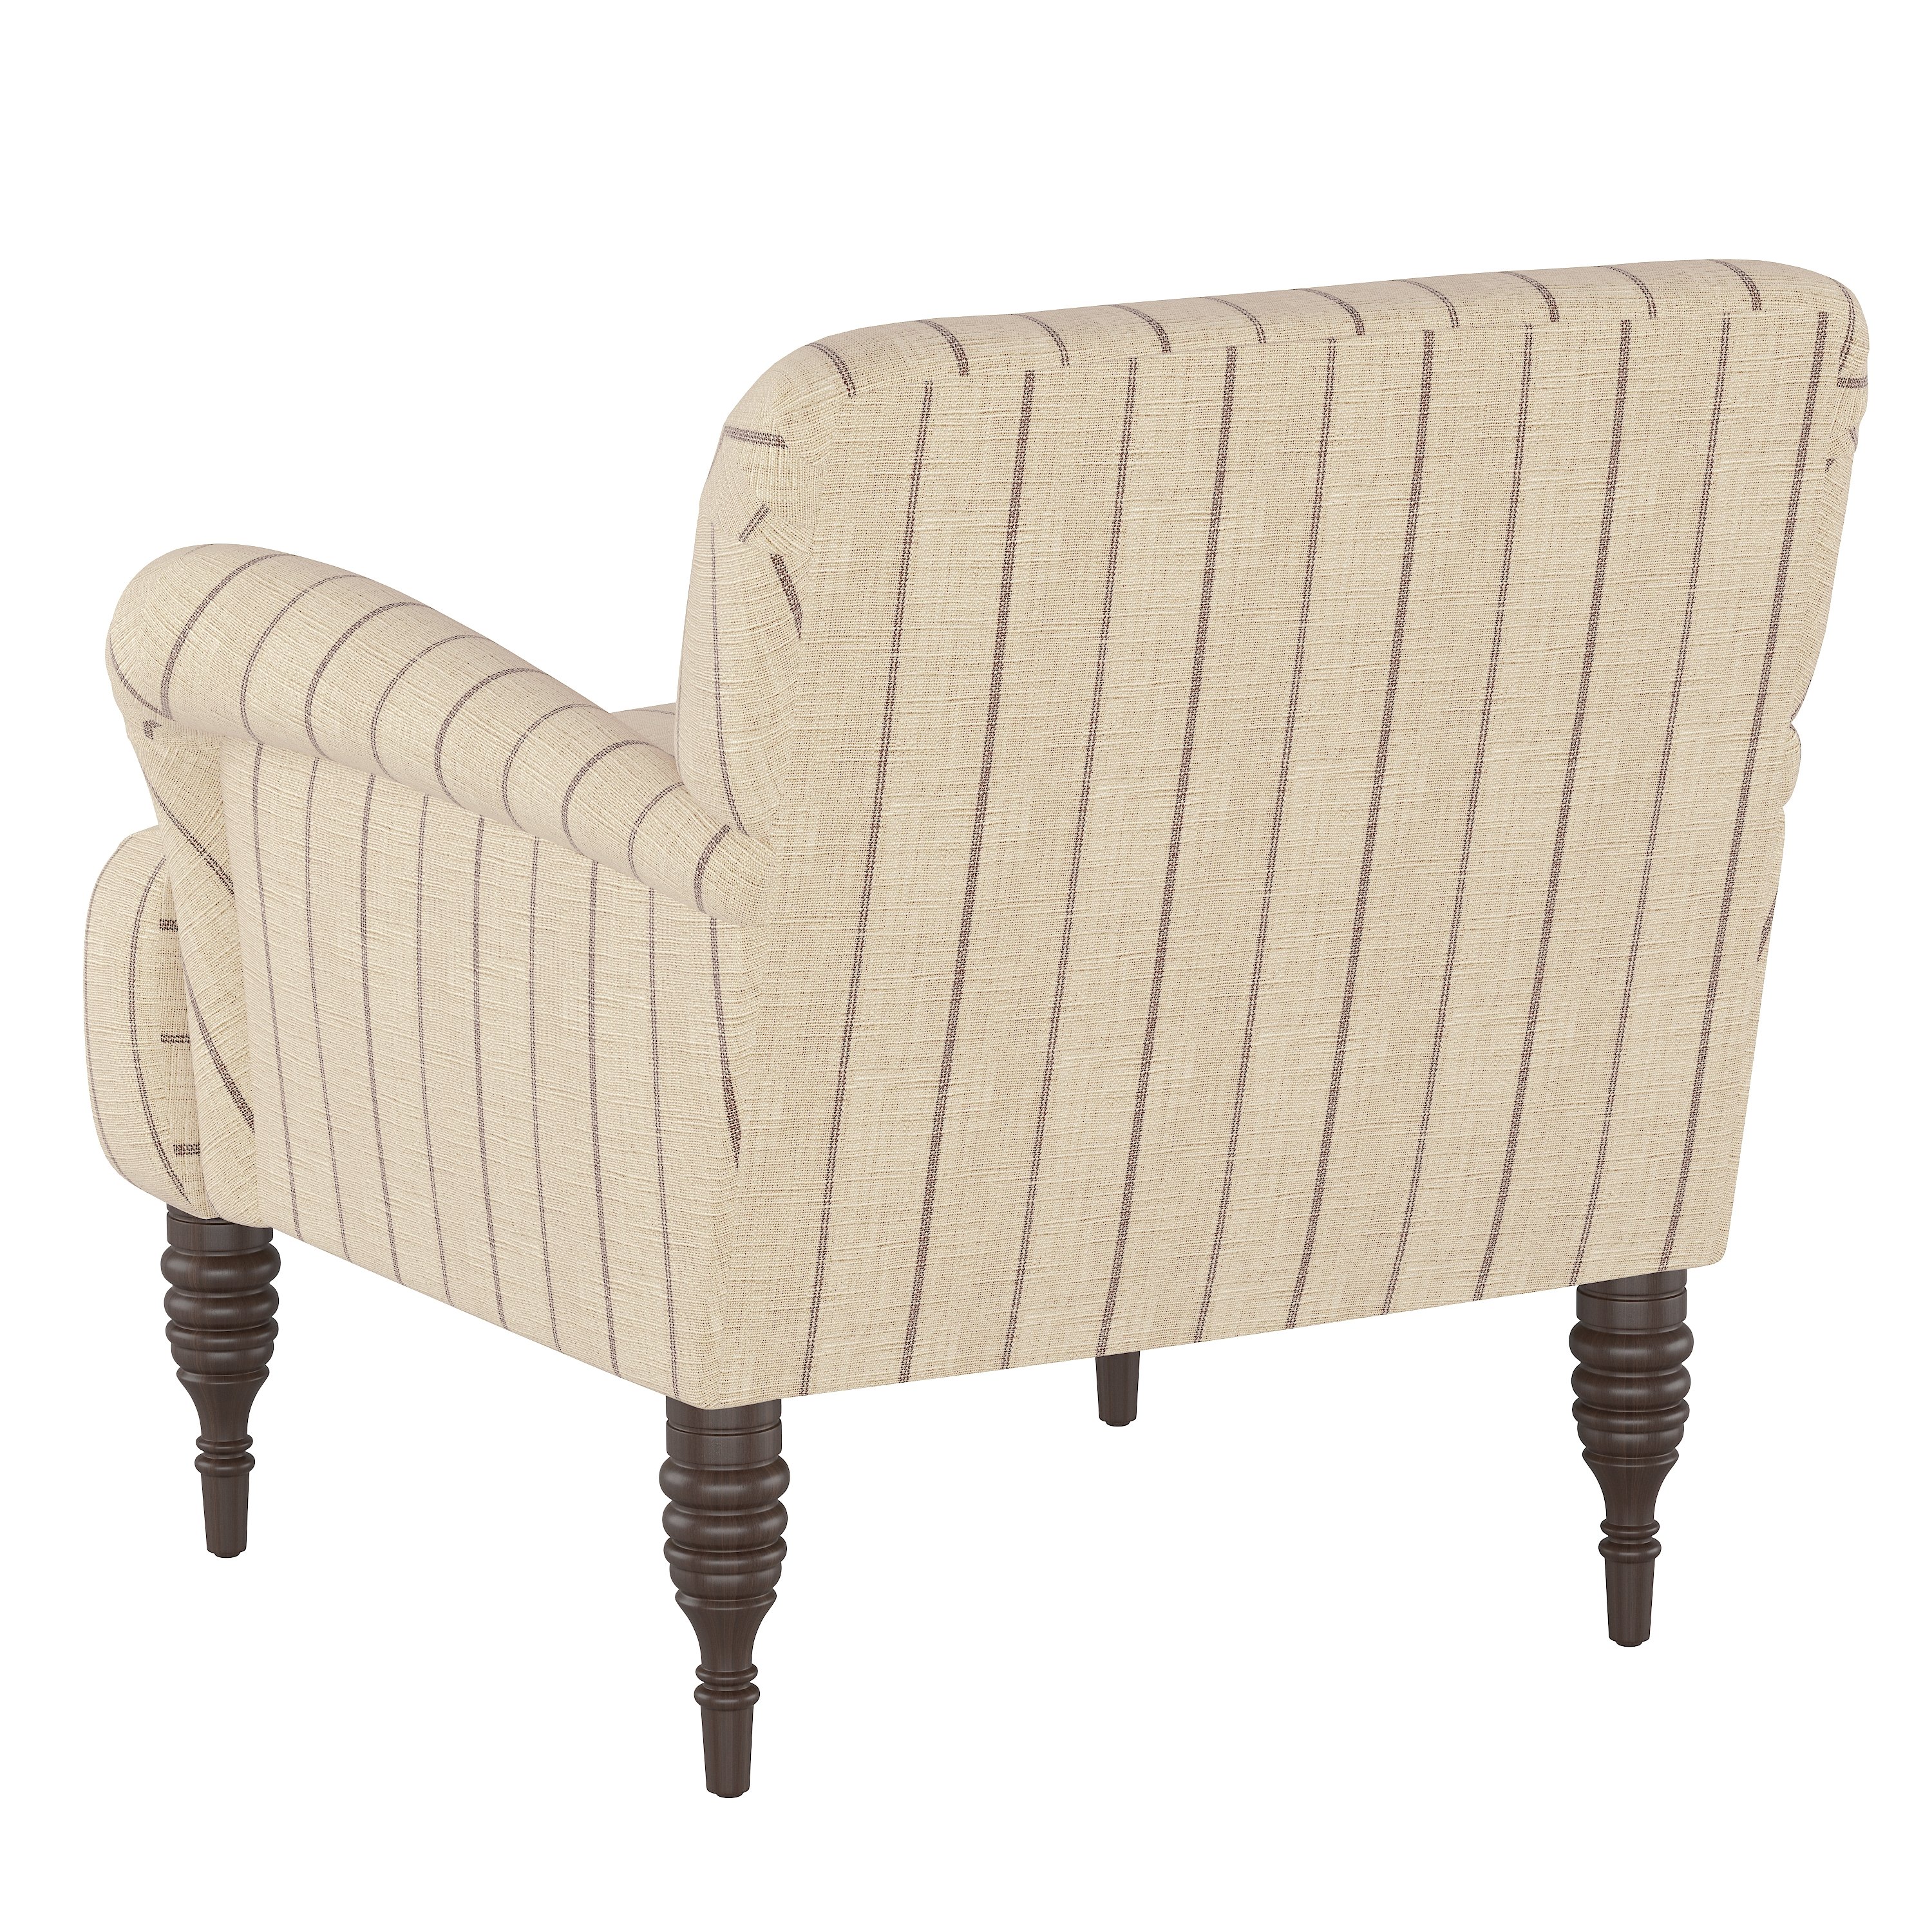 Vyolet Accent Chair - Image 3